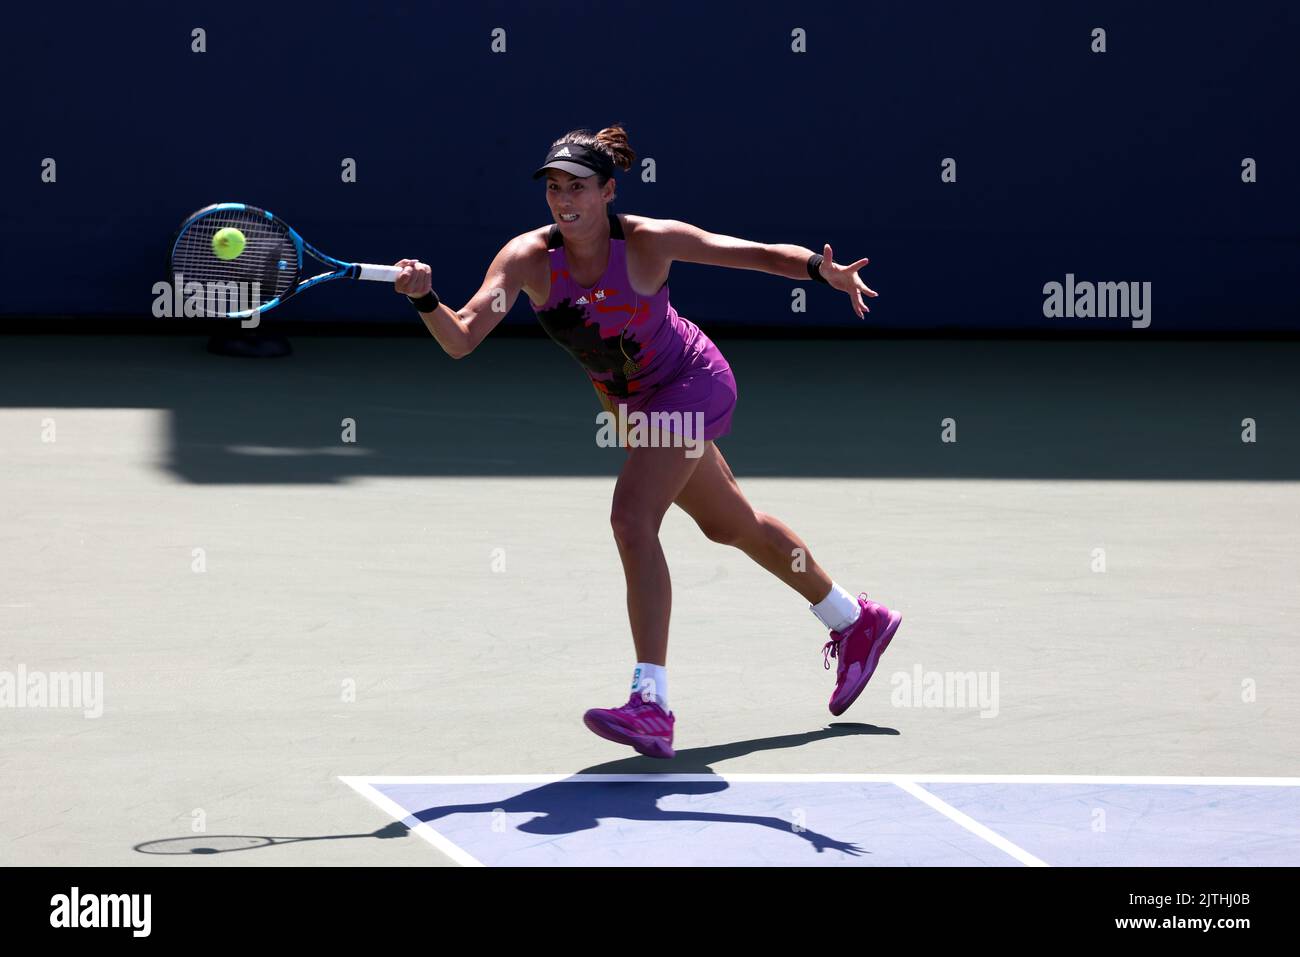 Flushing Meadows, New York, USA. 30th Aug, 2022. Garbine Muguruza of Spain during her first round victory over Clara Tauson of Denmark at the US Open yesterday. Credit: Adam Stoltman/Alamy Live News Stock Photo